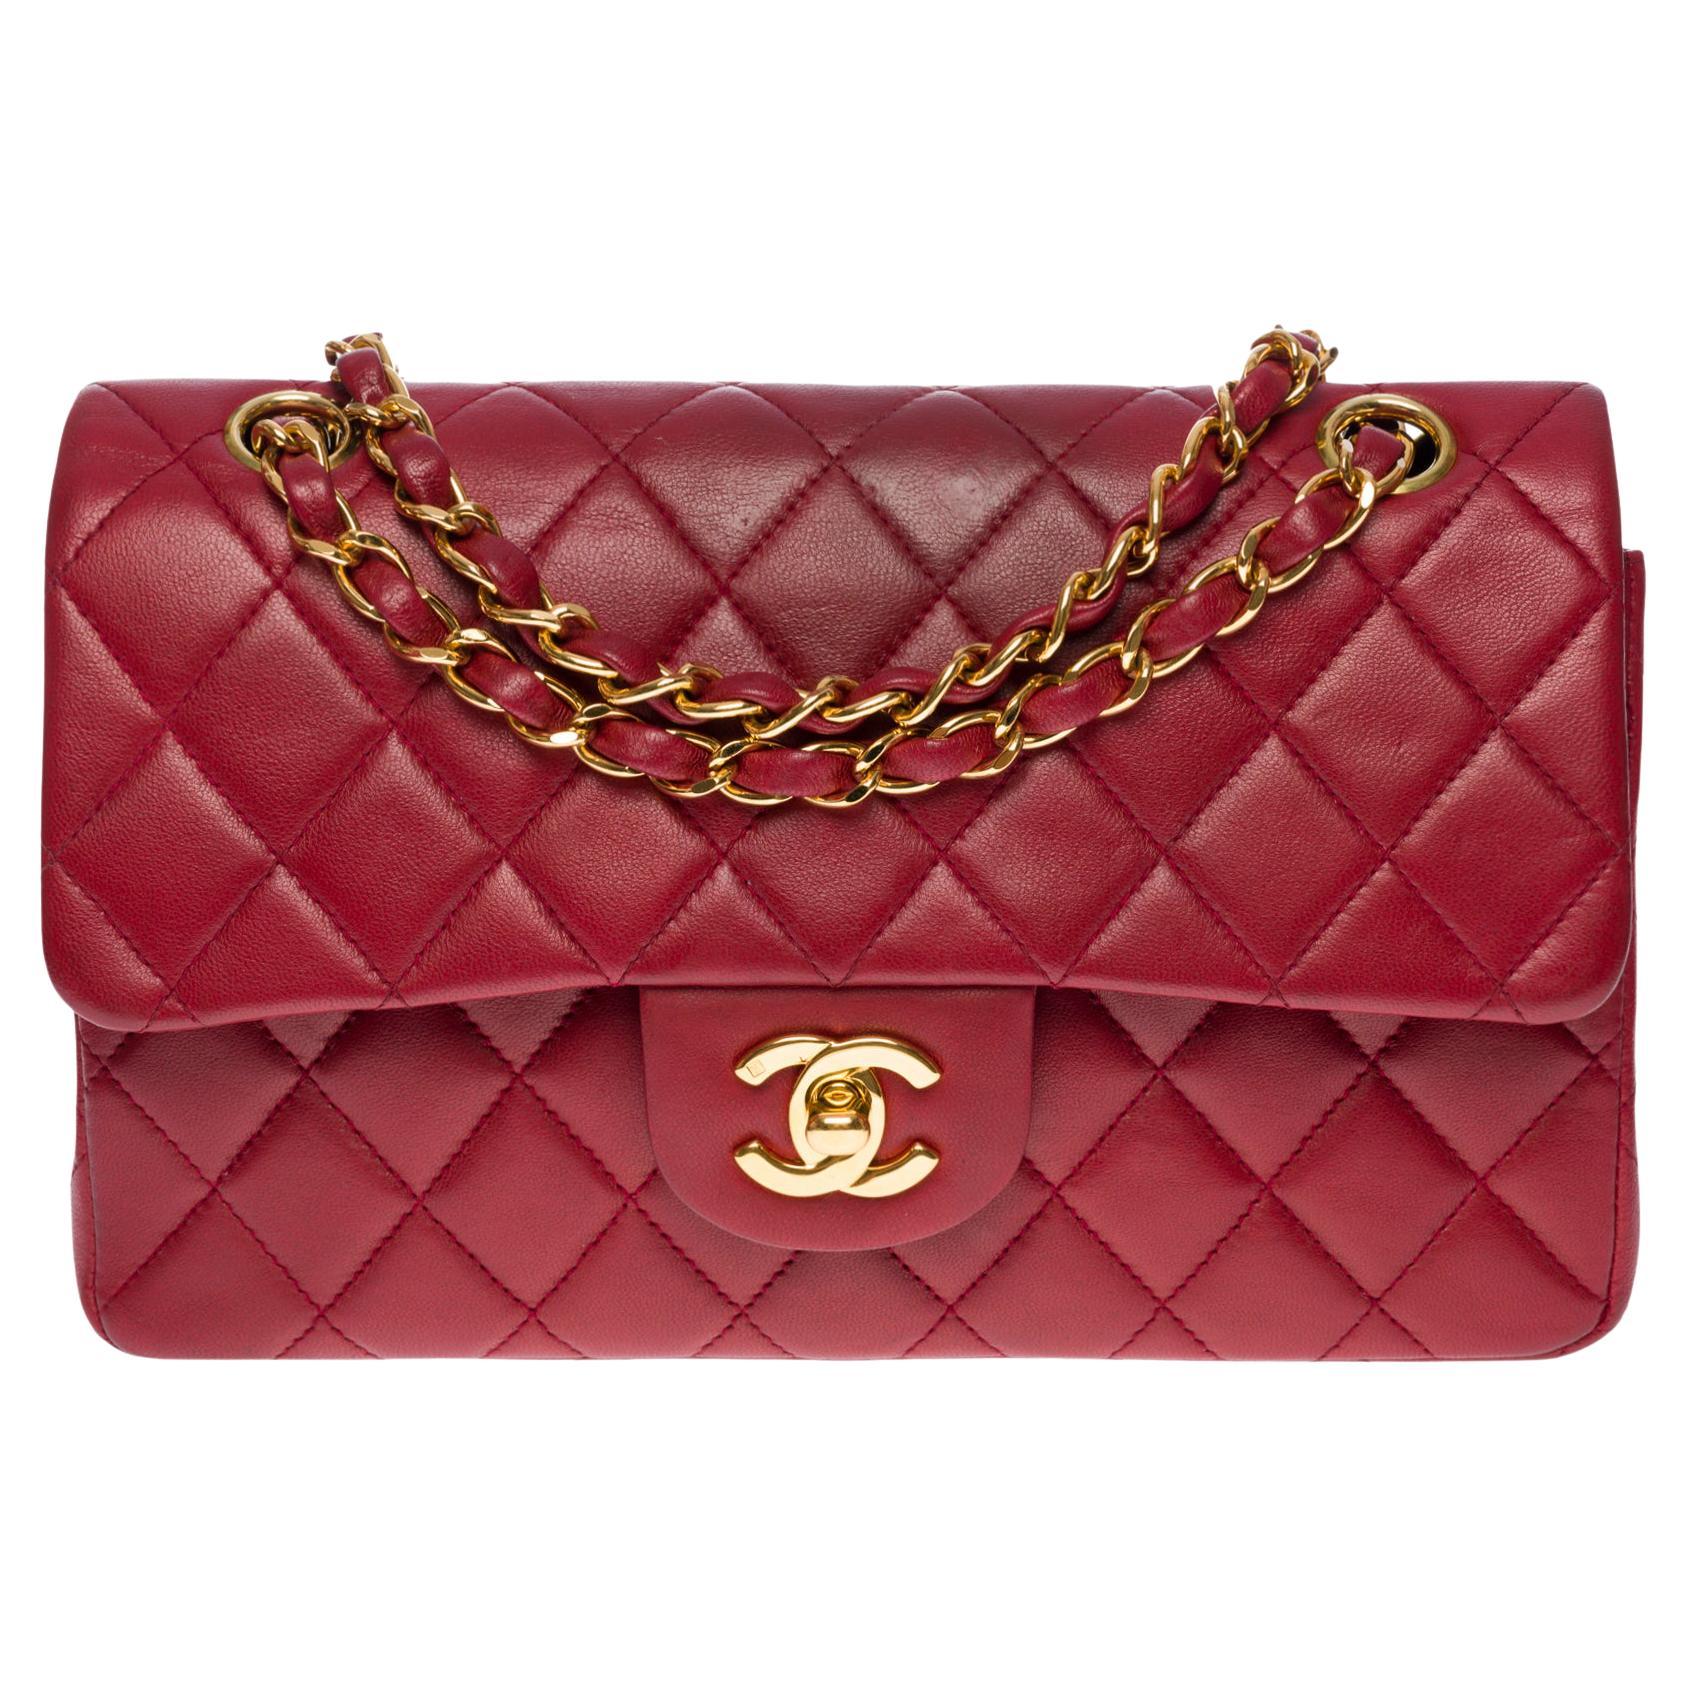 Chanel Timeless 23cm double flap Shoulder bag in red quilted lambskin, GHW